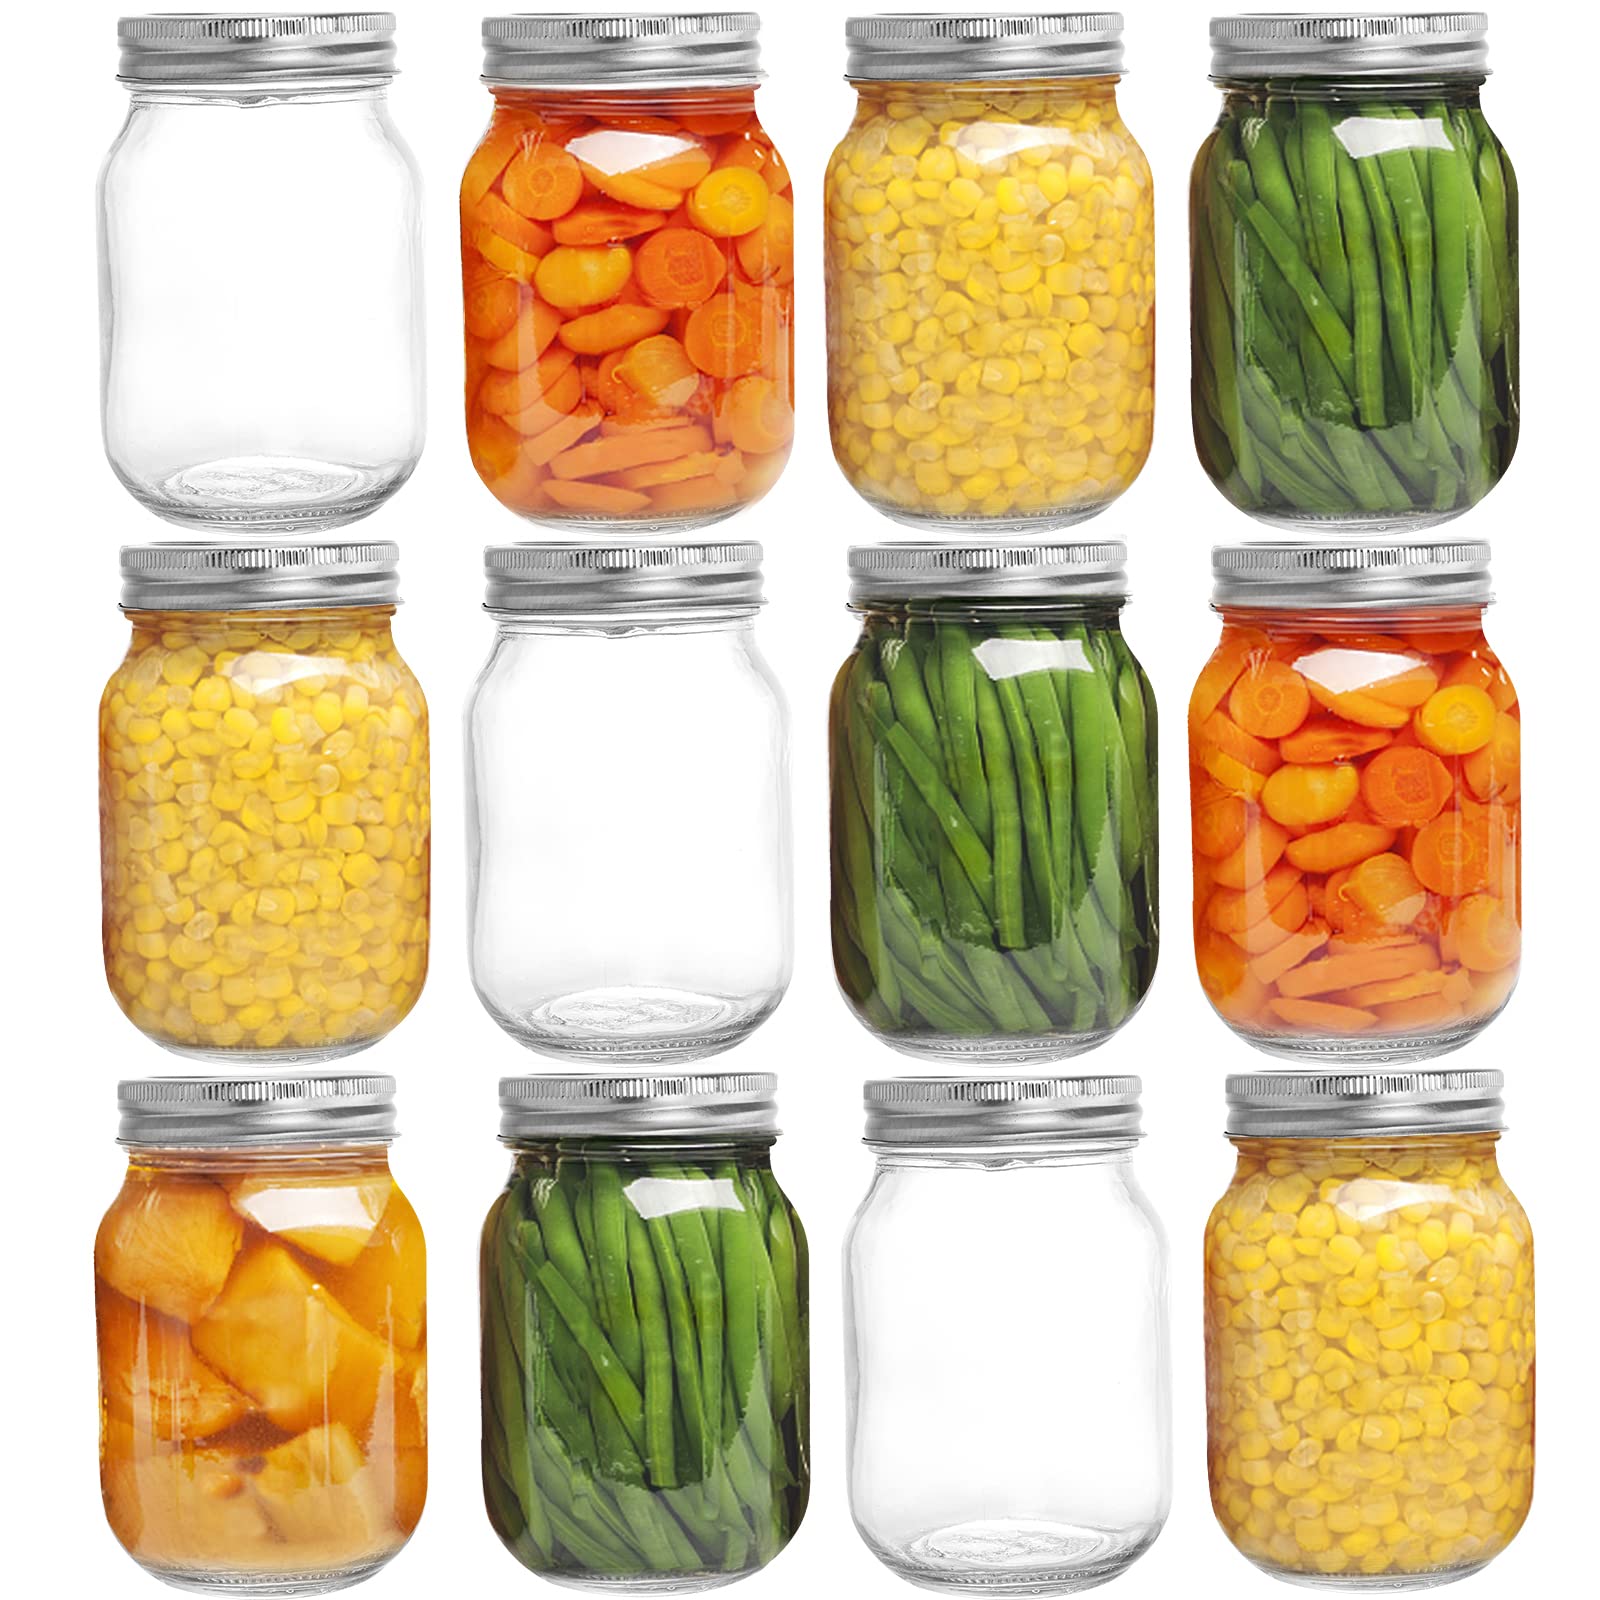 YOUEON 12 Pack 16 Oz Mason Jars with Airtight Lids and Bands, Glass Jars Canning Jars Spice Jars for Fermenting, Pickling, Juice, Jelly, Honey, Wed...